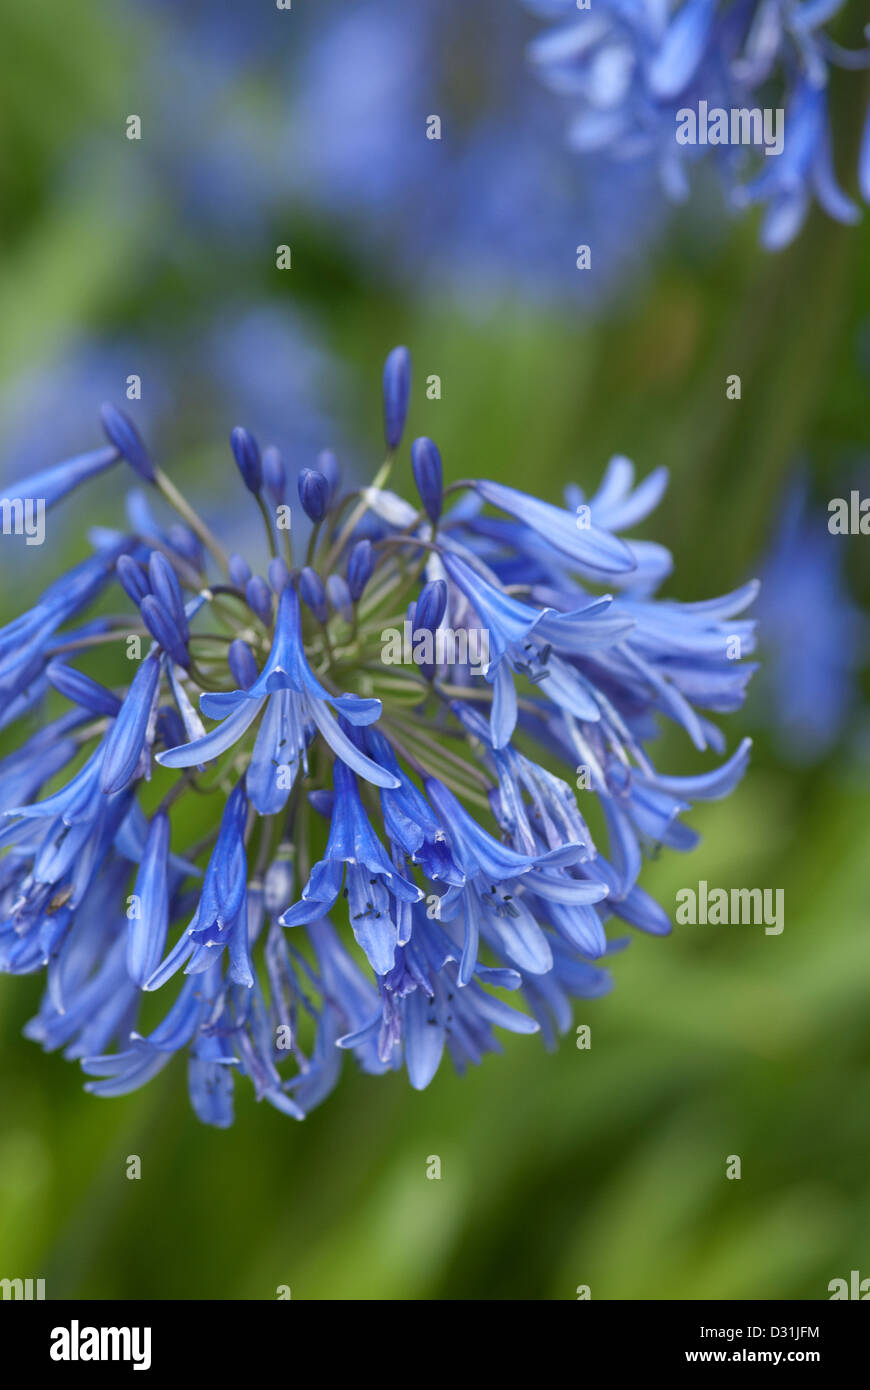 Agapanthus blue flowers in close up Stock Photo